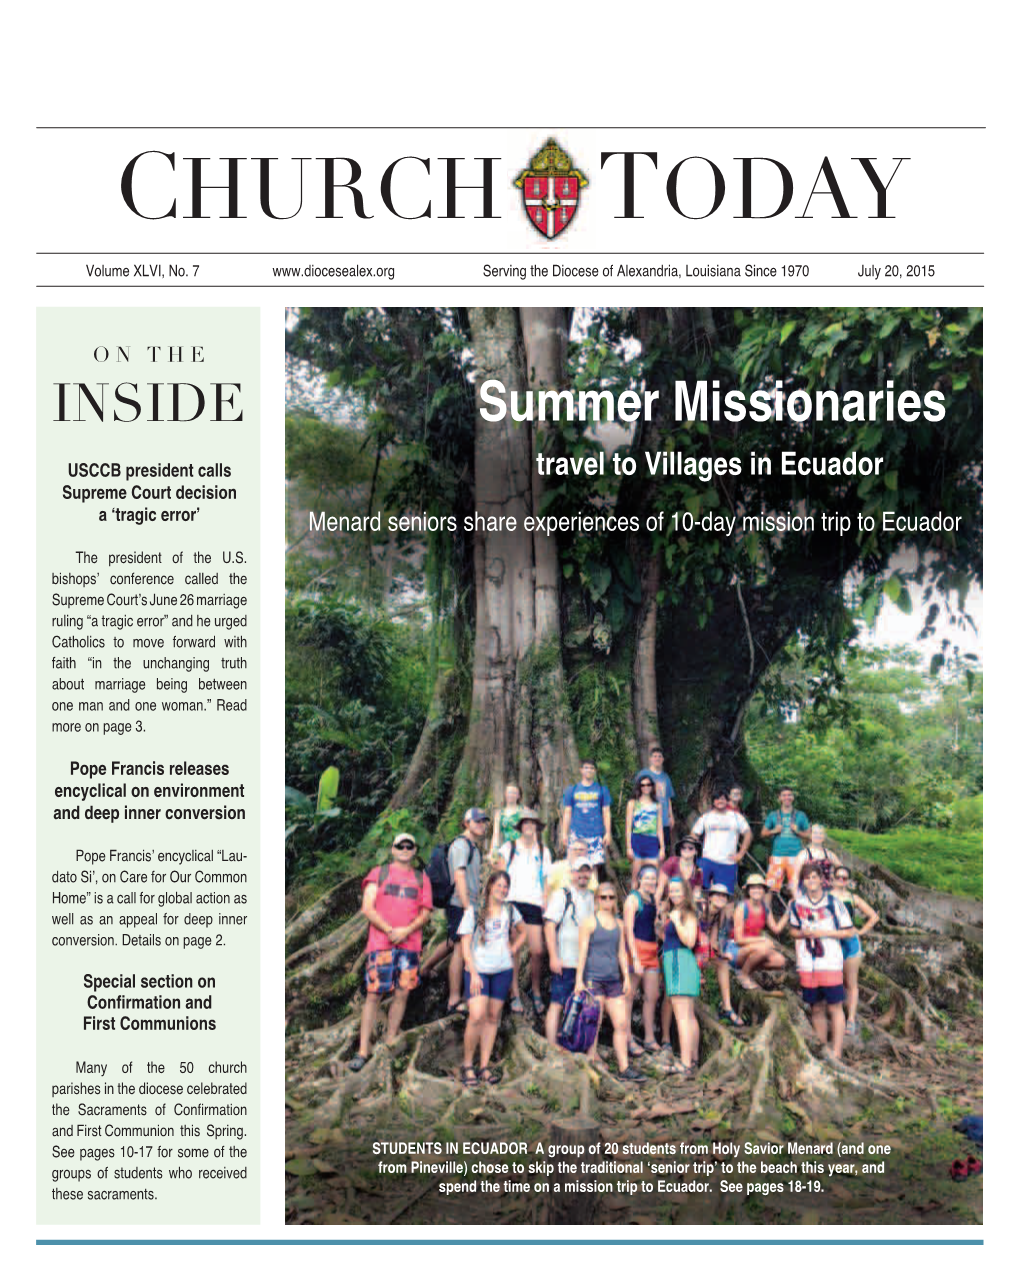 The Church Today, July 20, 2015